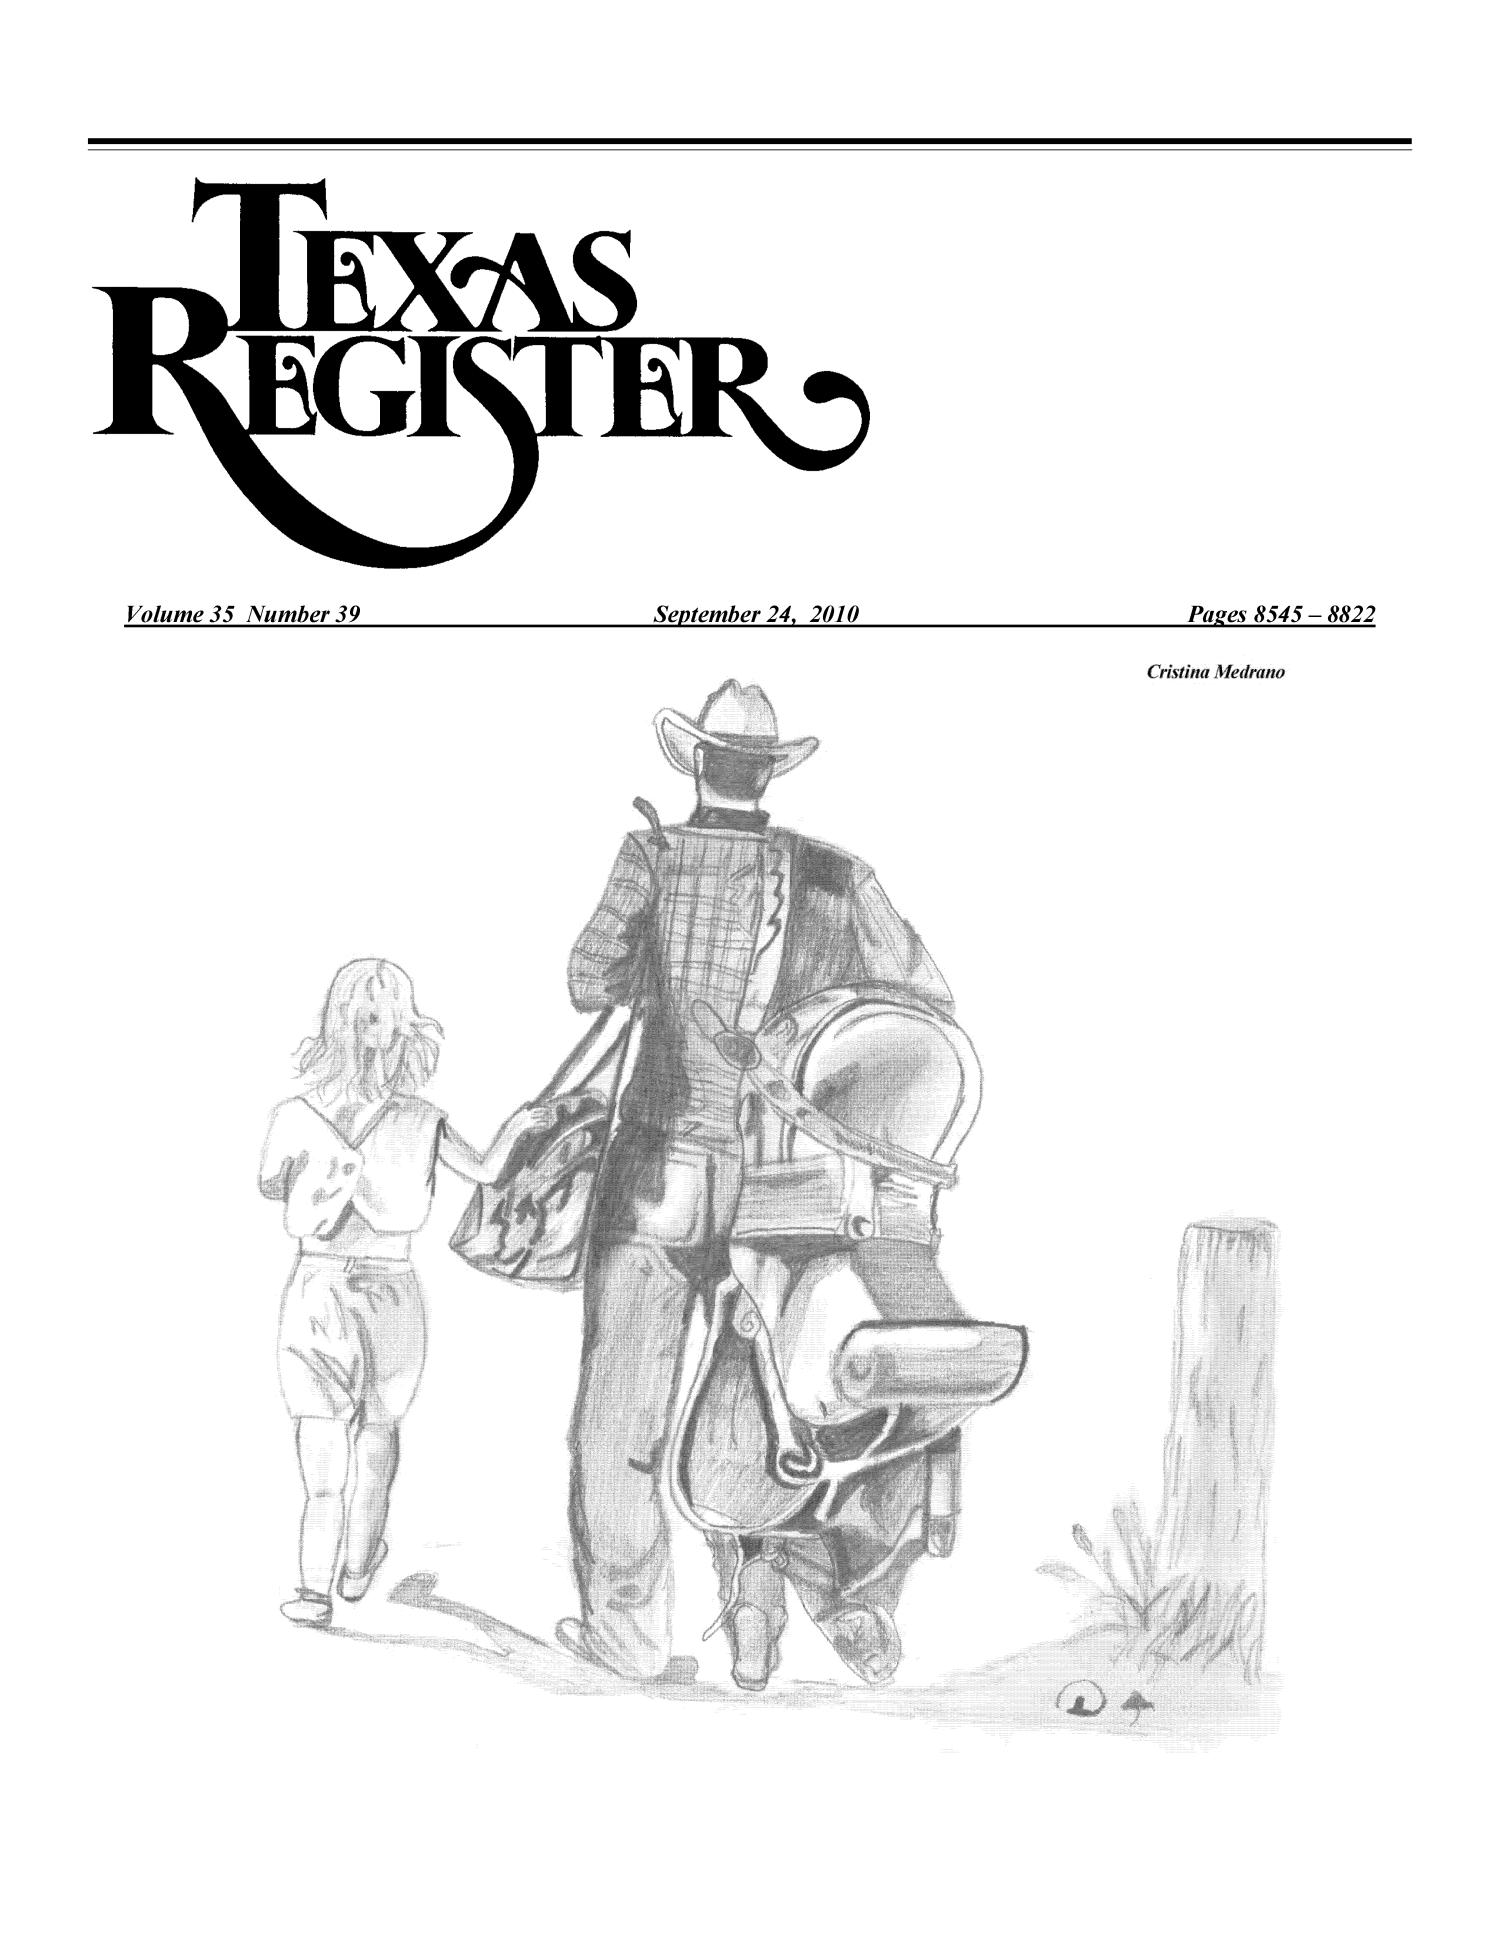 Texas Register, Volume 35, Number 39, Pages 8545-8822, September 24, 2010
                                                
                                                    Title Page
                                                